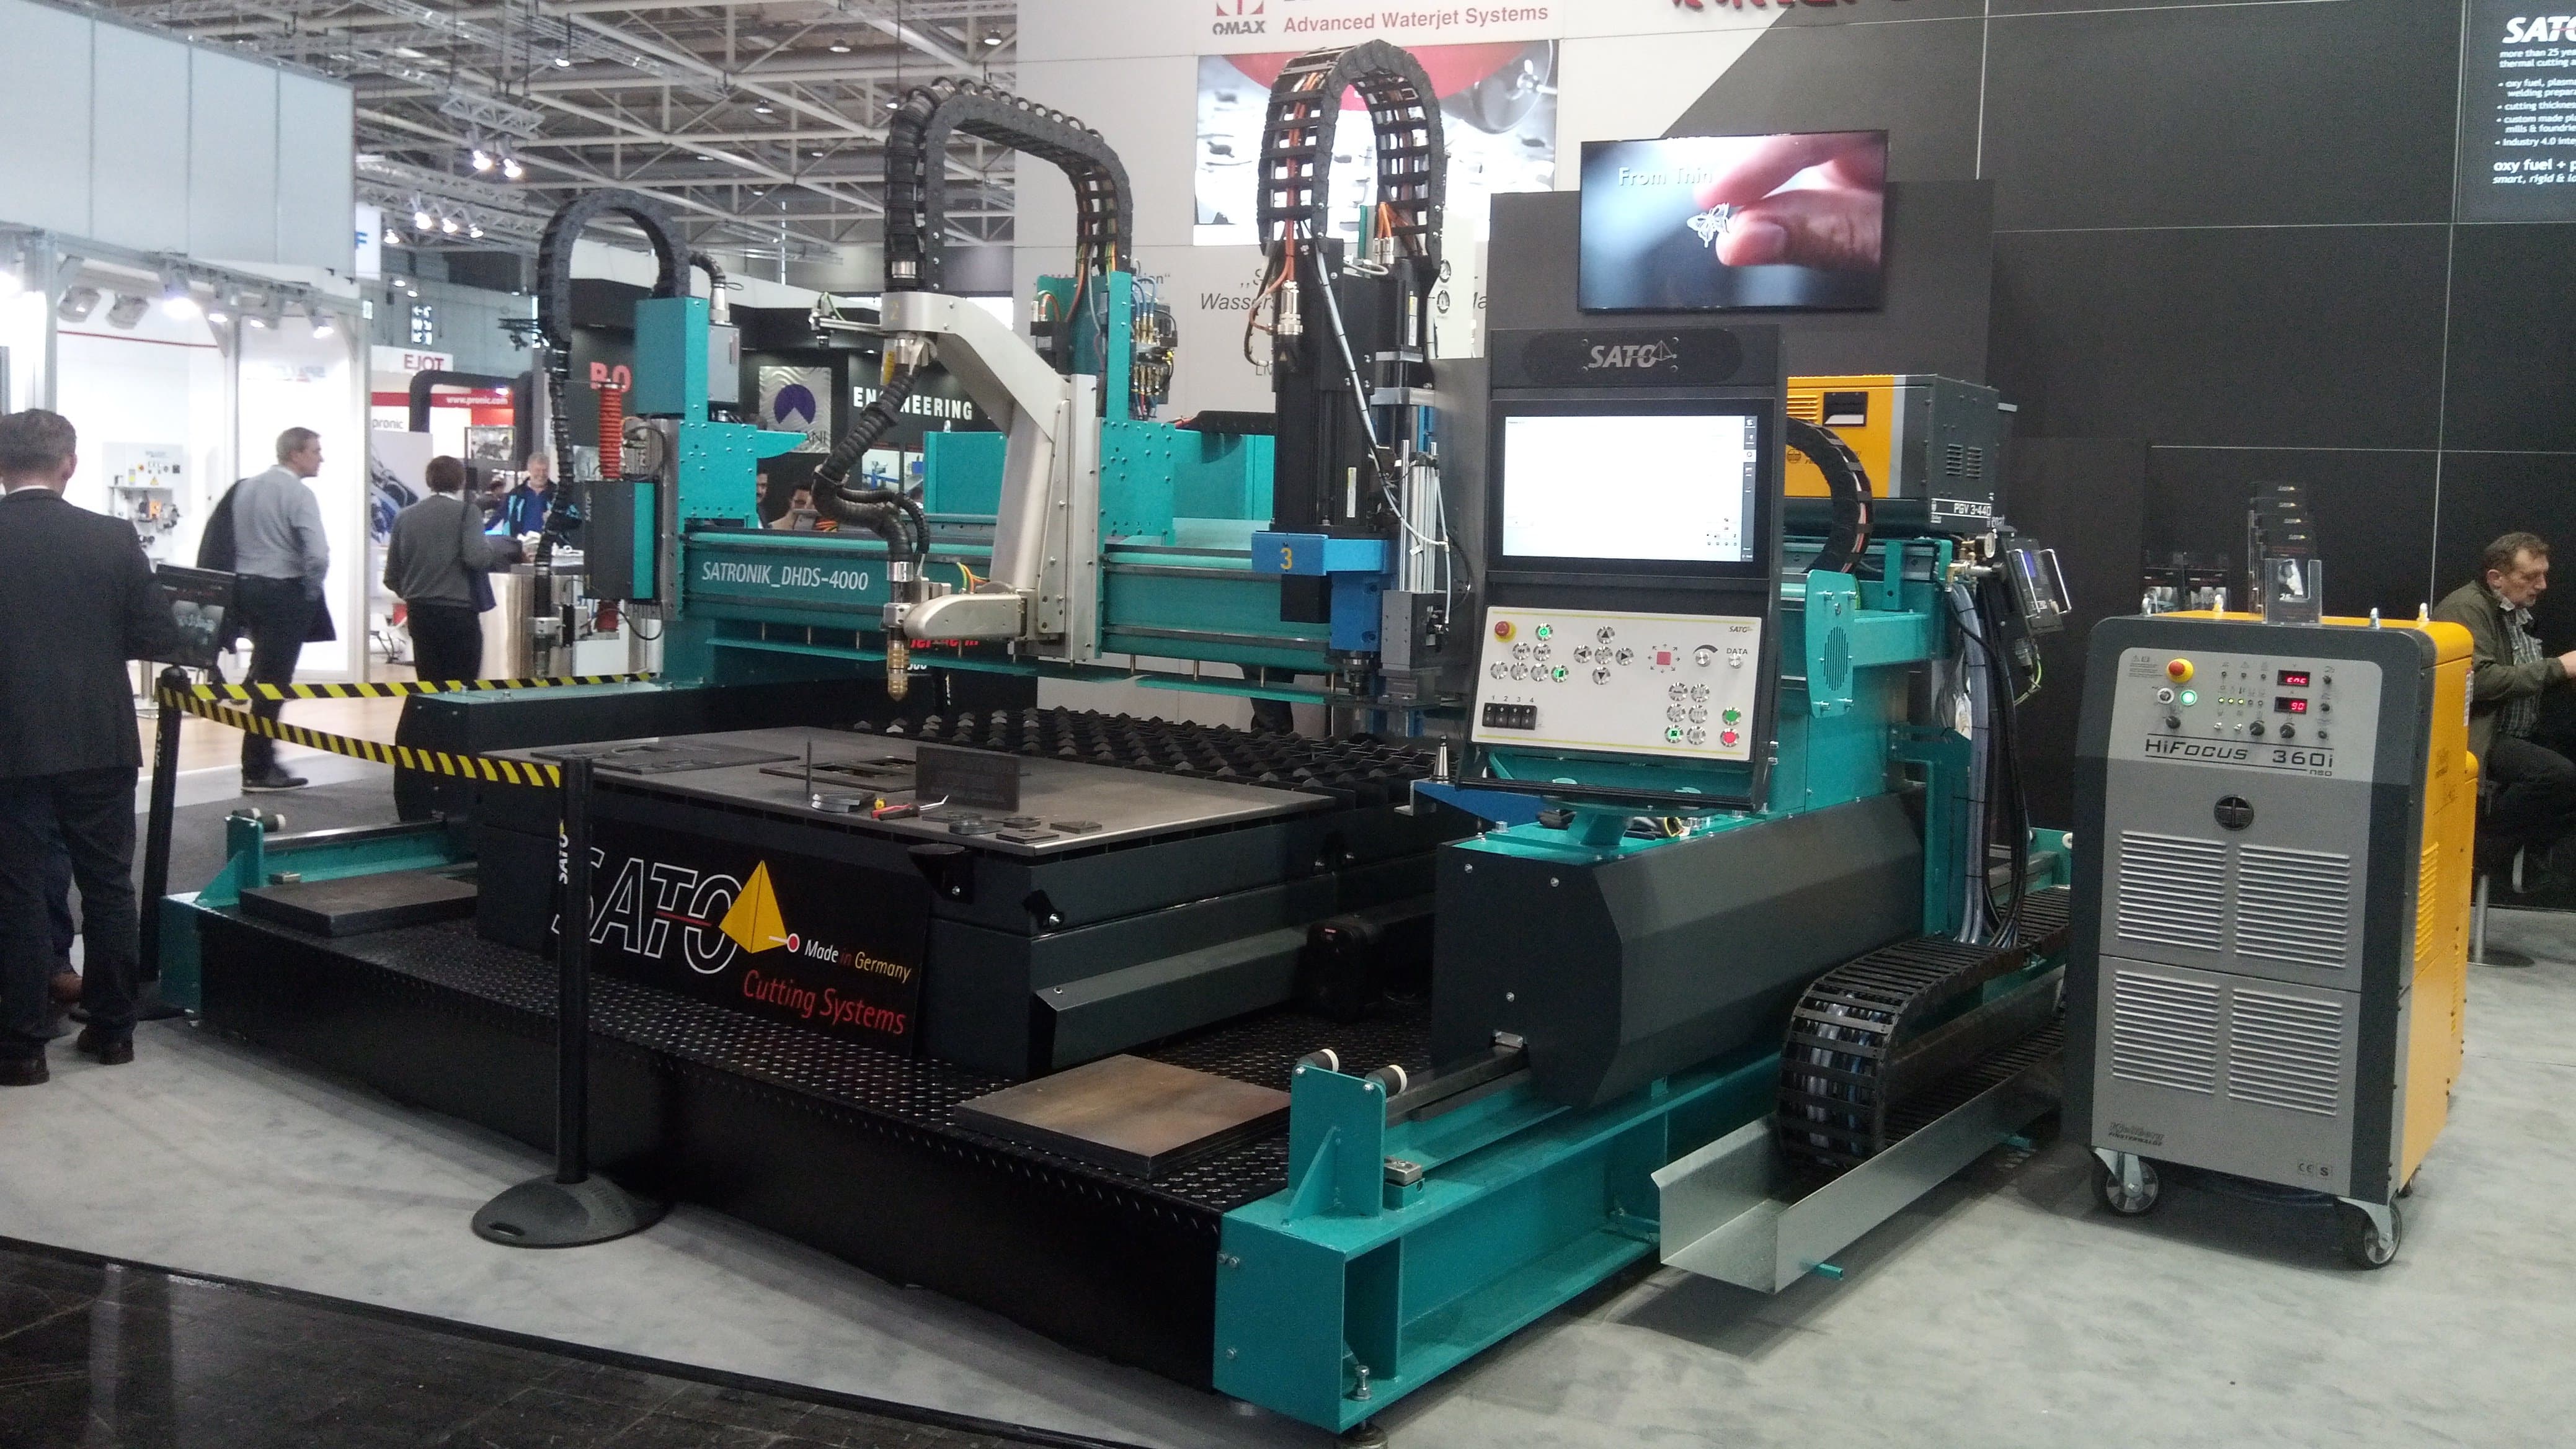 DHD-S with plasma bevel-head, oxy fuel cutting head and powerful drilling unit